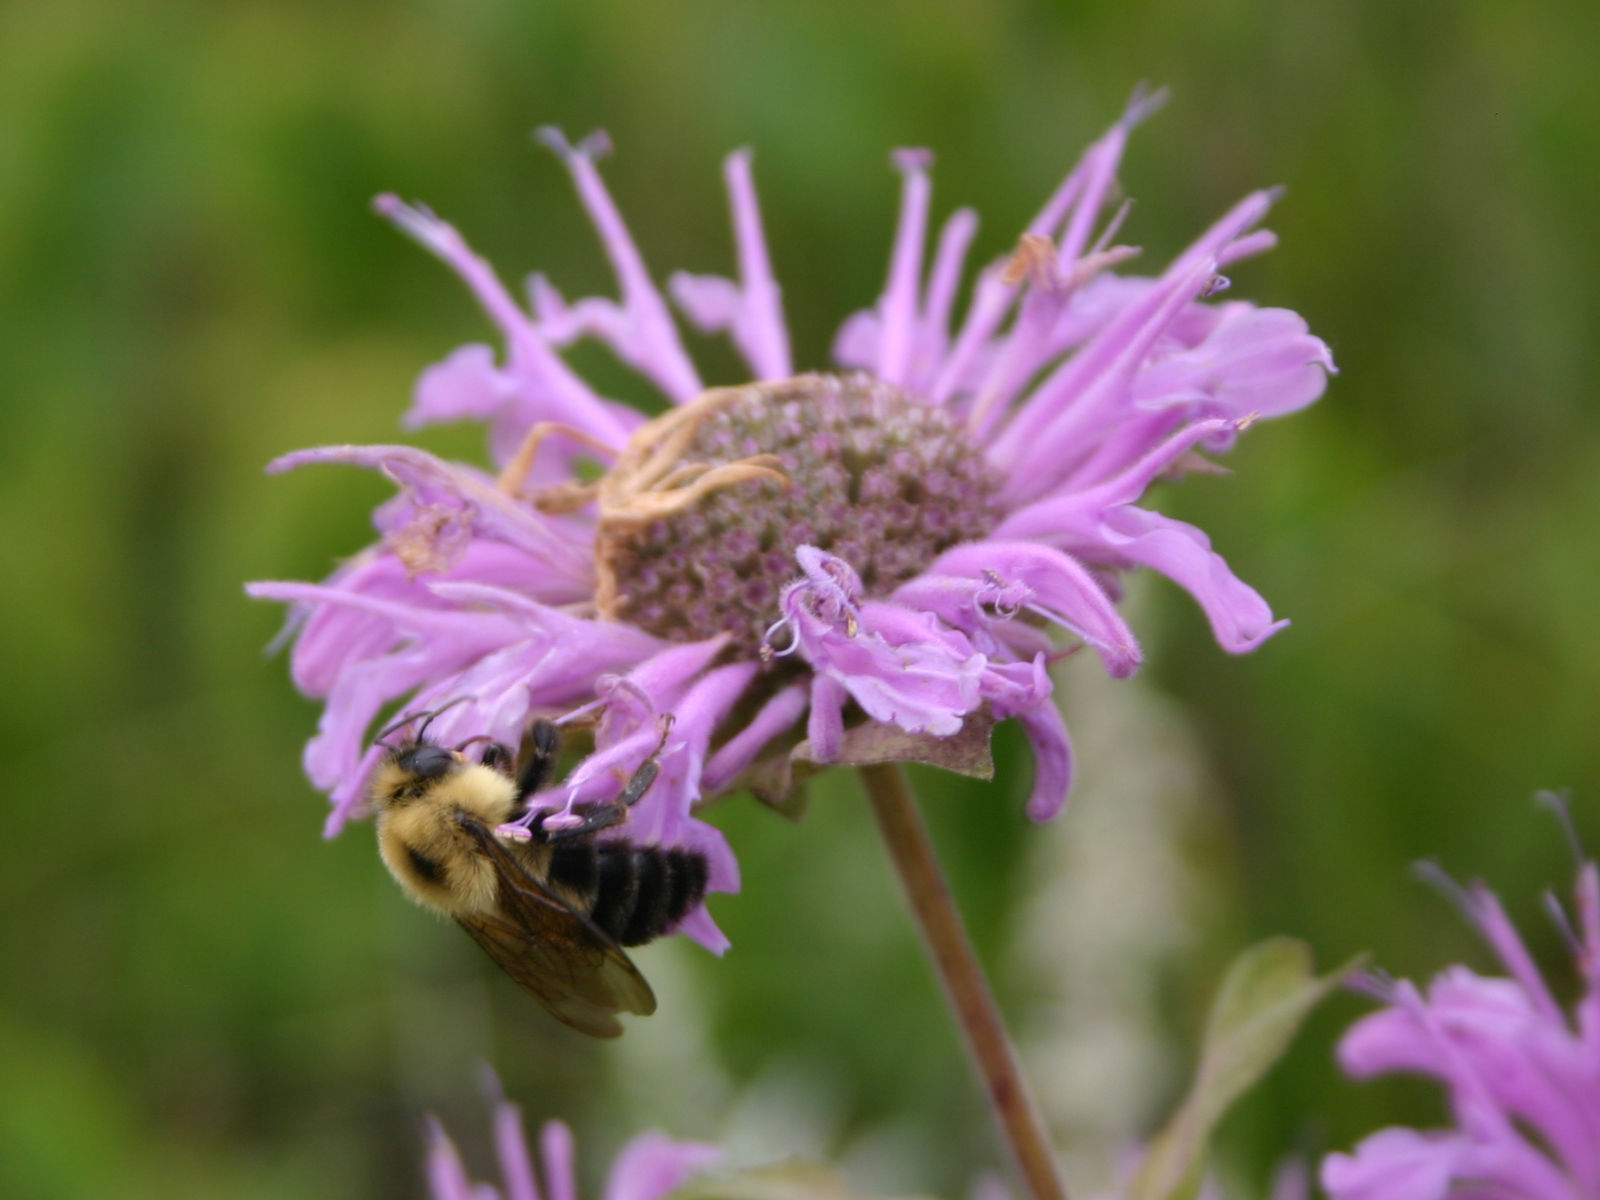 A fluffy yellow and black bumble bee crawling along the fringed edge of a purple bergamot flower.